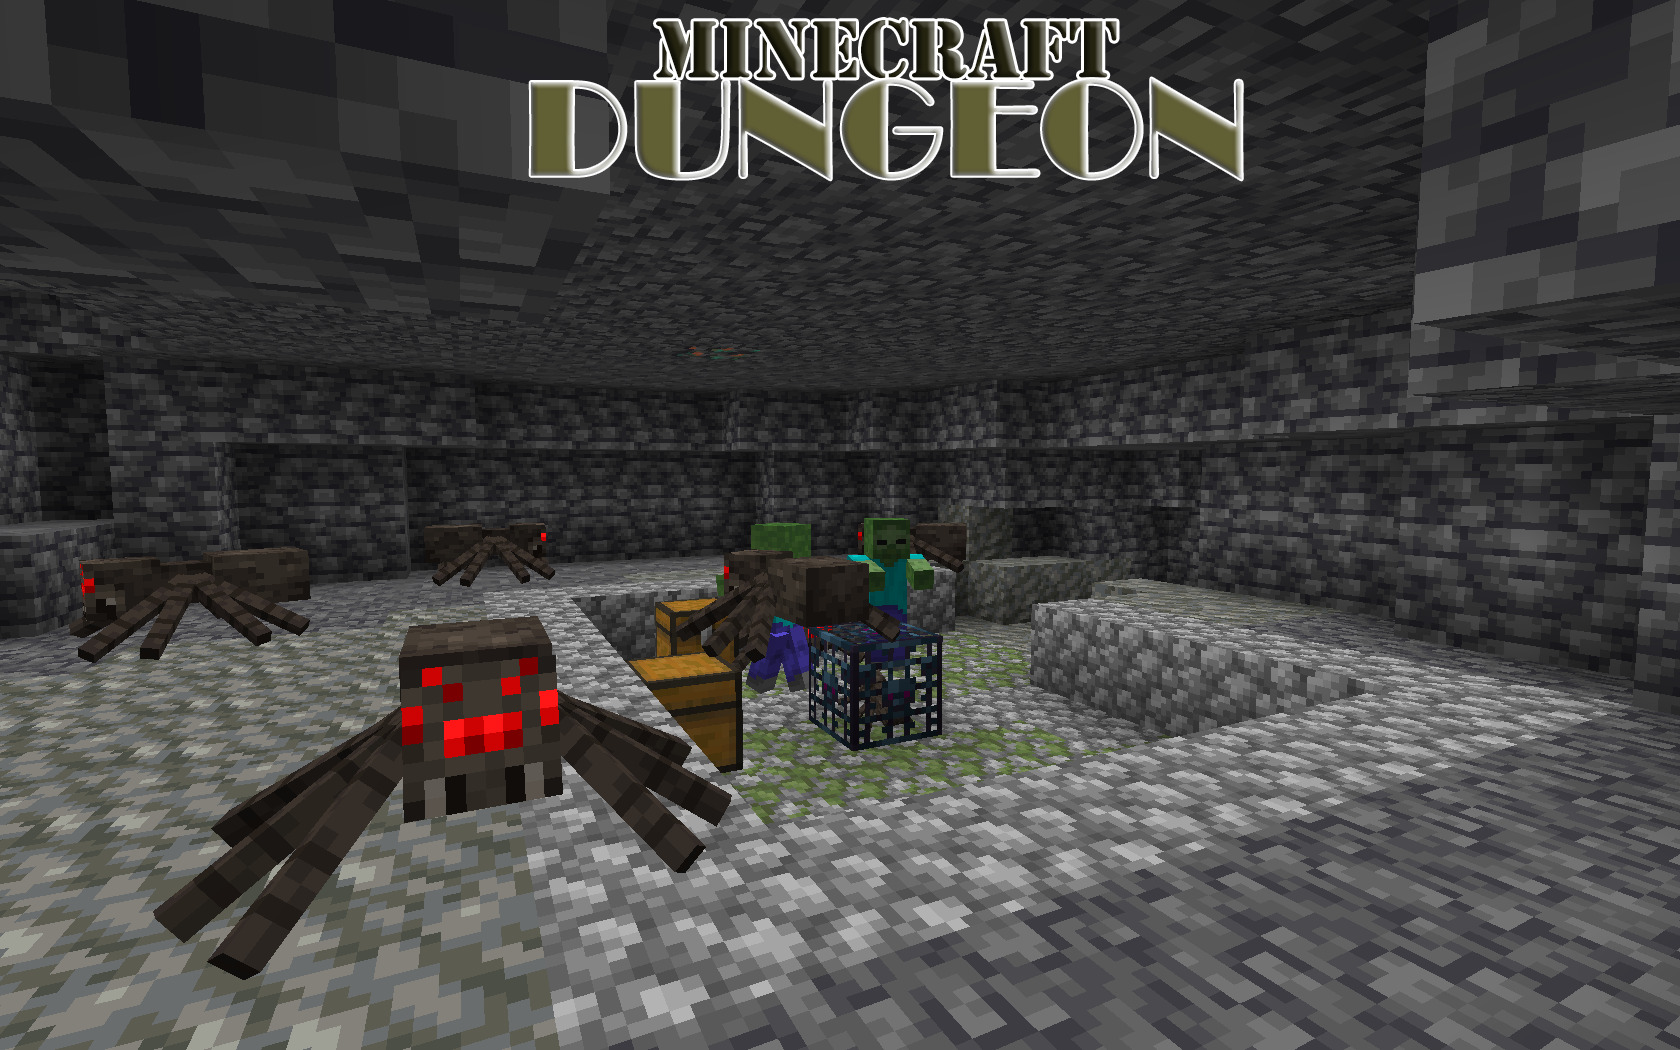 How To Find Dungeons in Minecraft